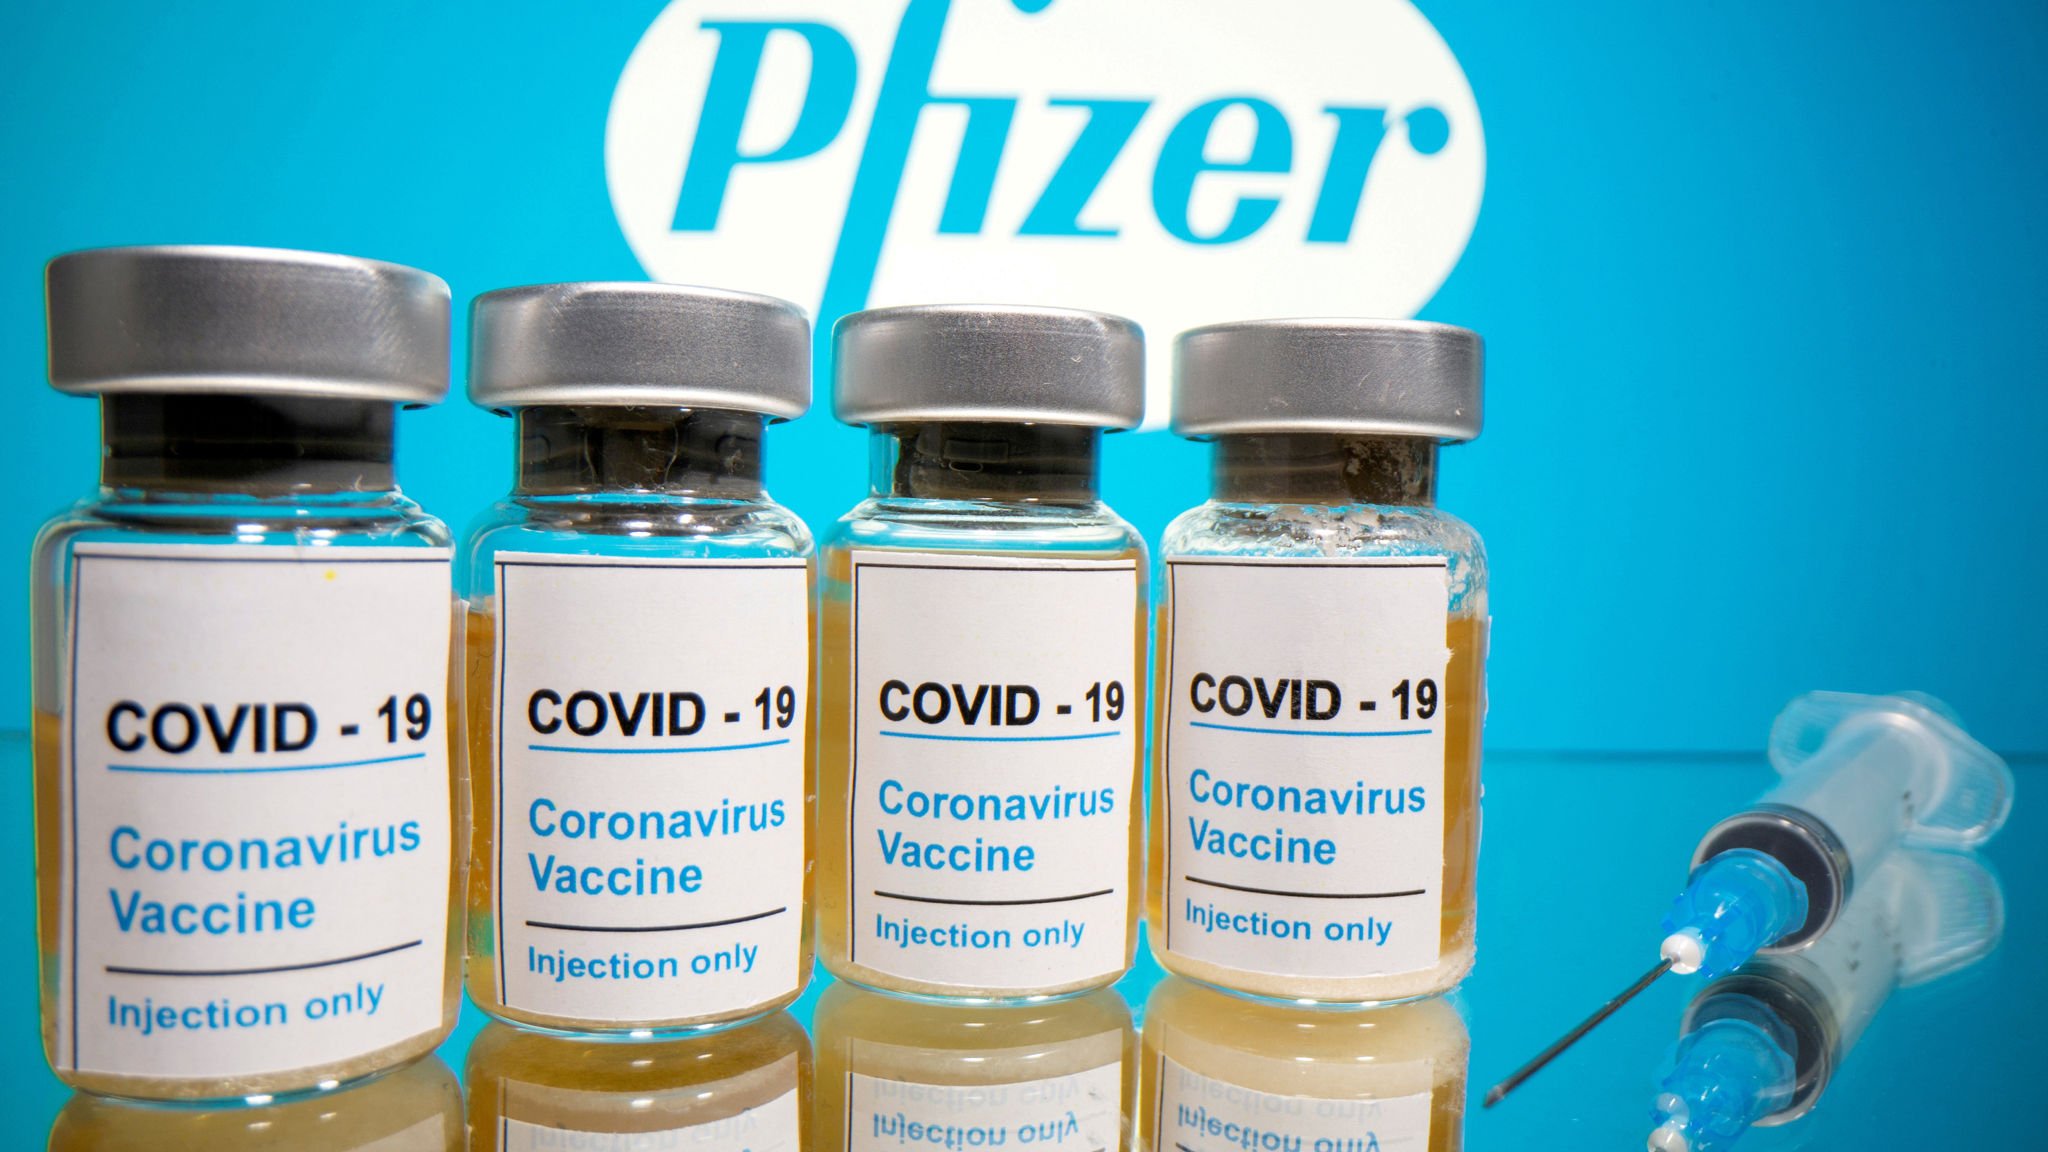 COVID-19 vaccine deliveries could start before Christmas